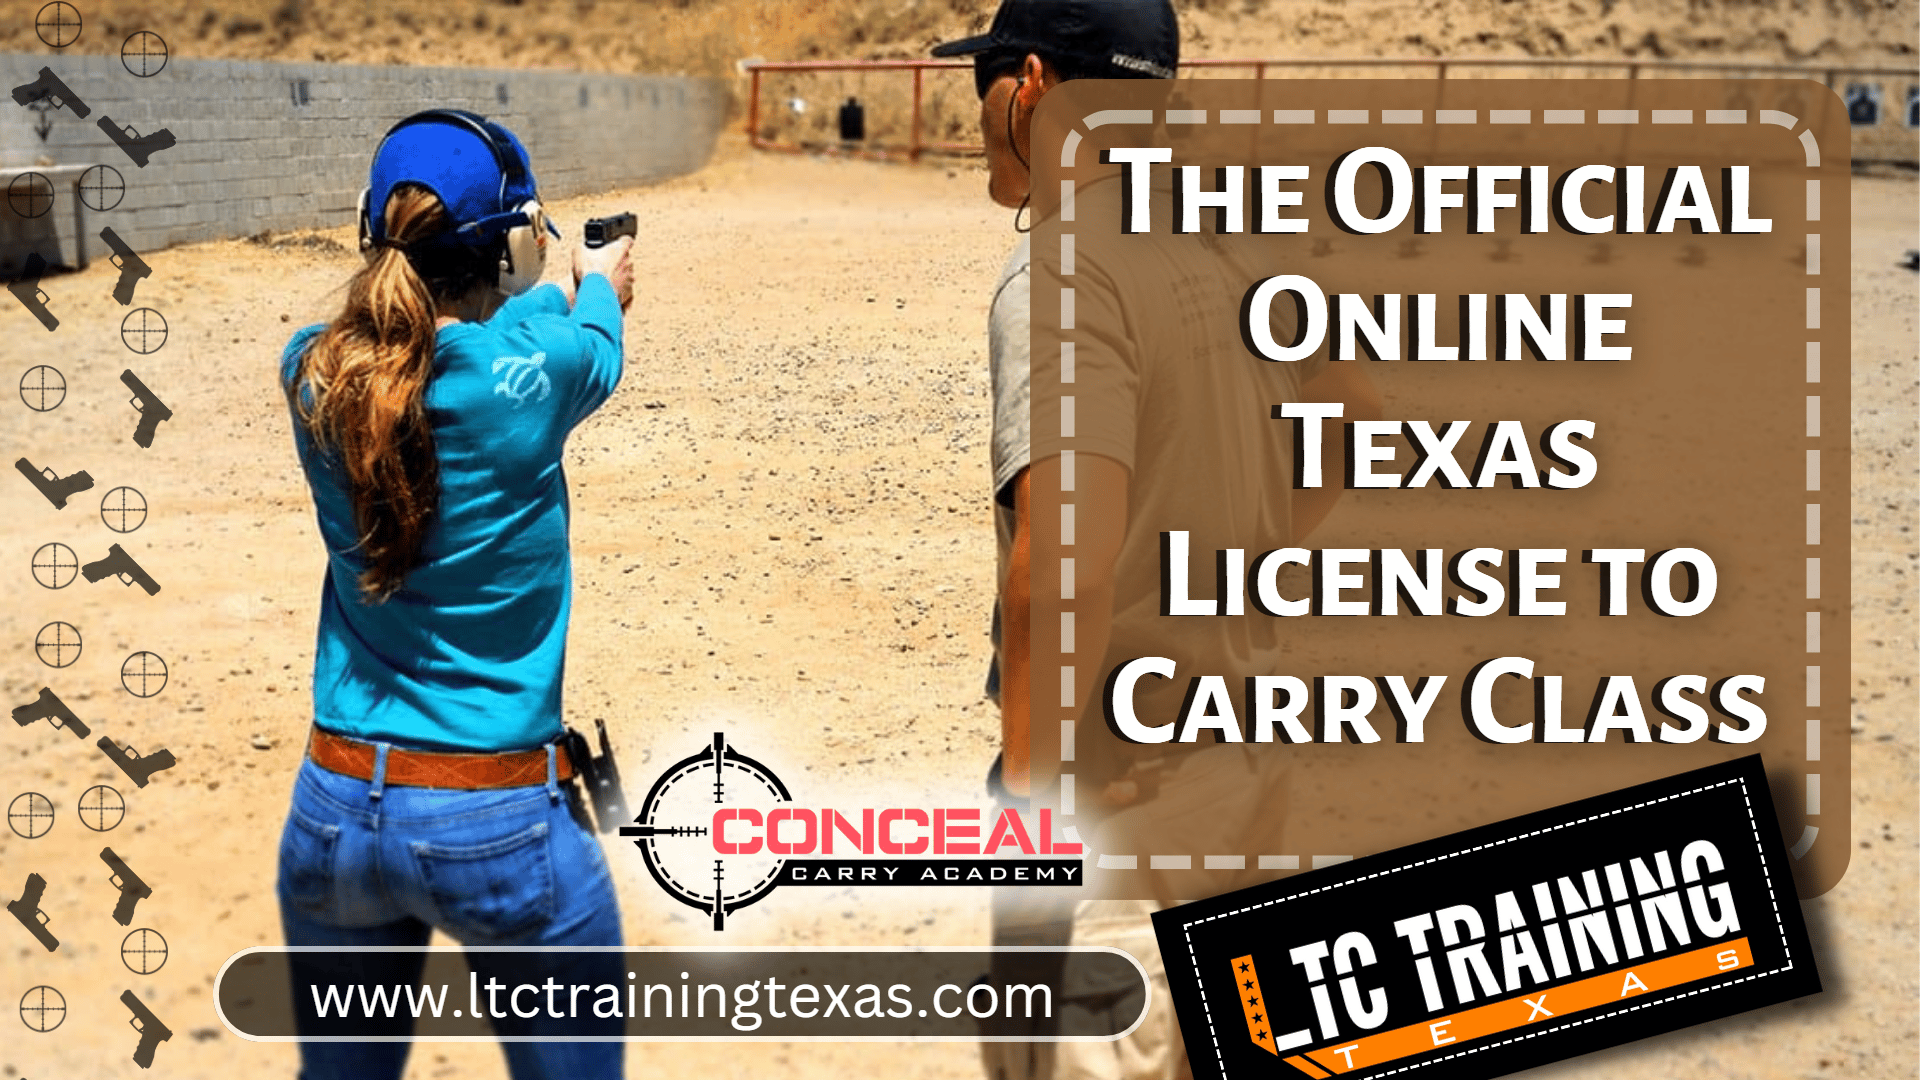 The Official Online Texas License to Carry Class